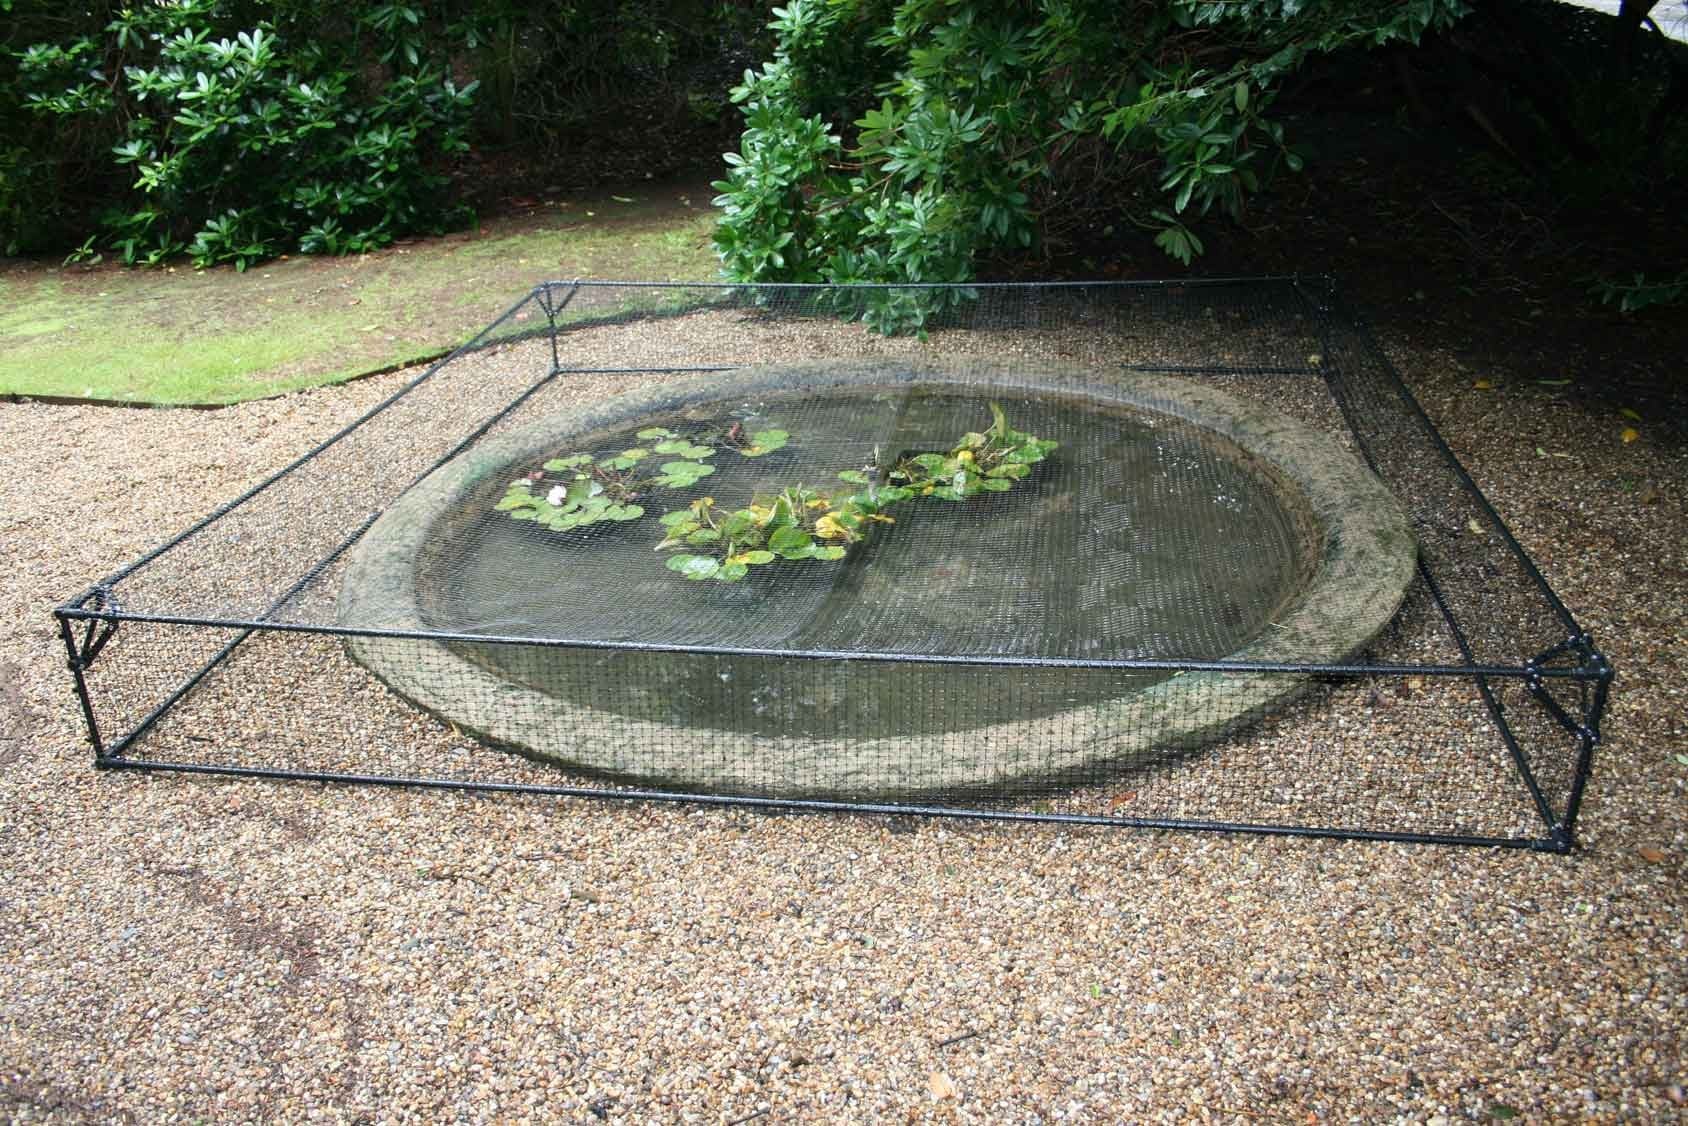 https://www.harrodhorticultural.com/uploads/images/products/GDN-607_Raised_Aluminium_Pond_Cover_1.jpg